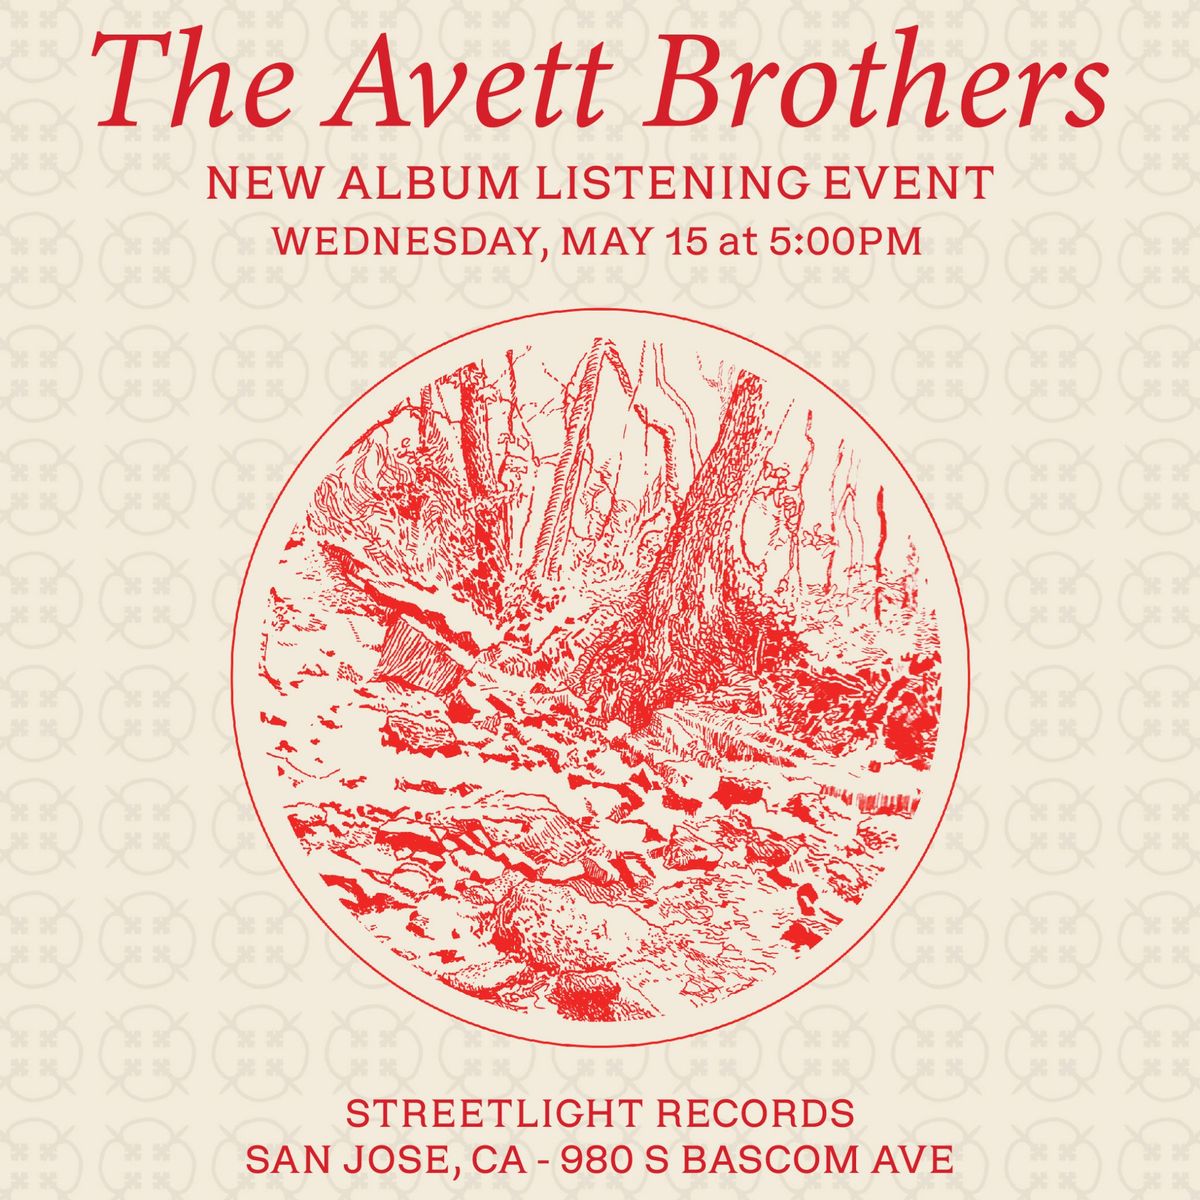 Avett Brothers Early Sale & Listening Party! 